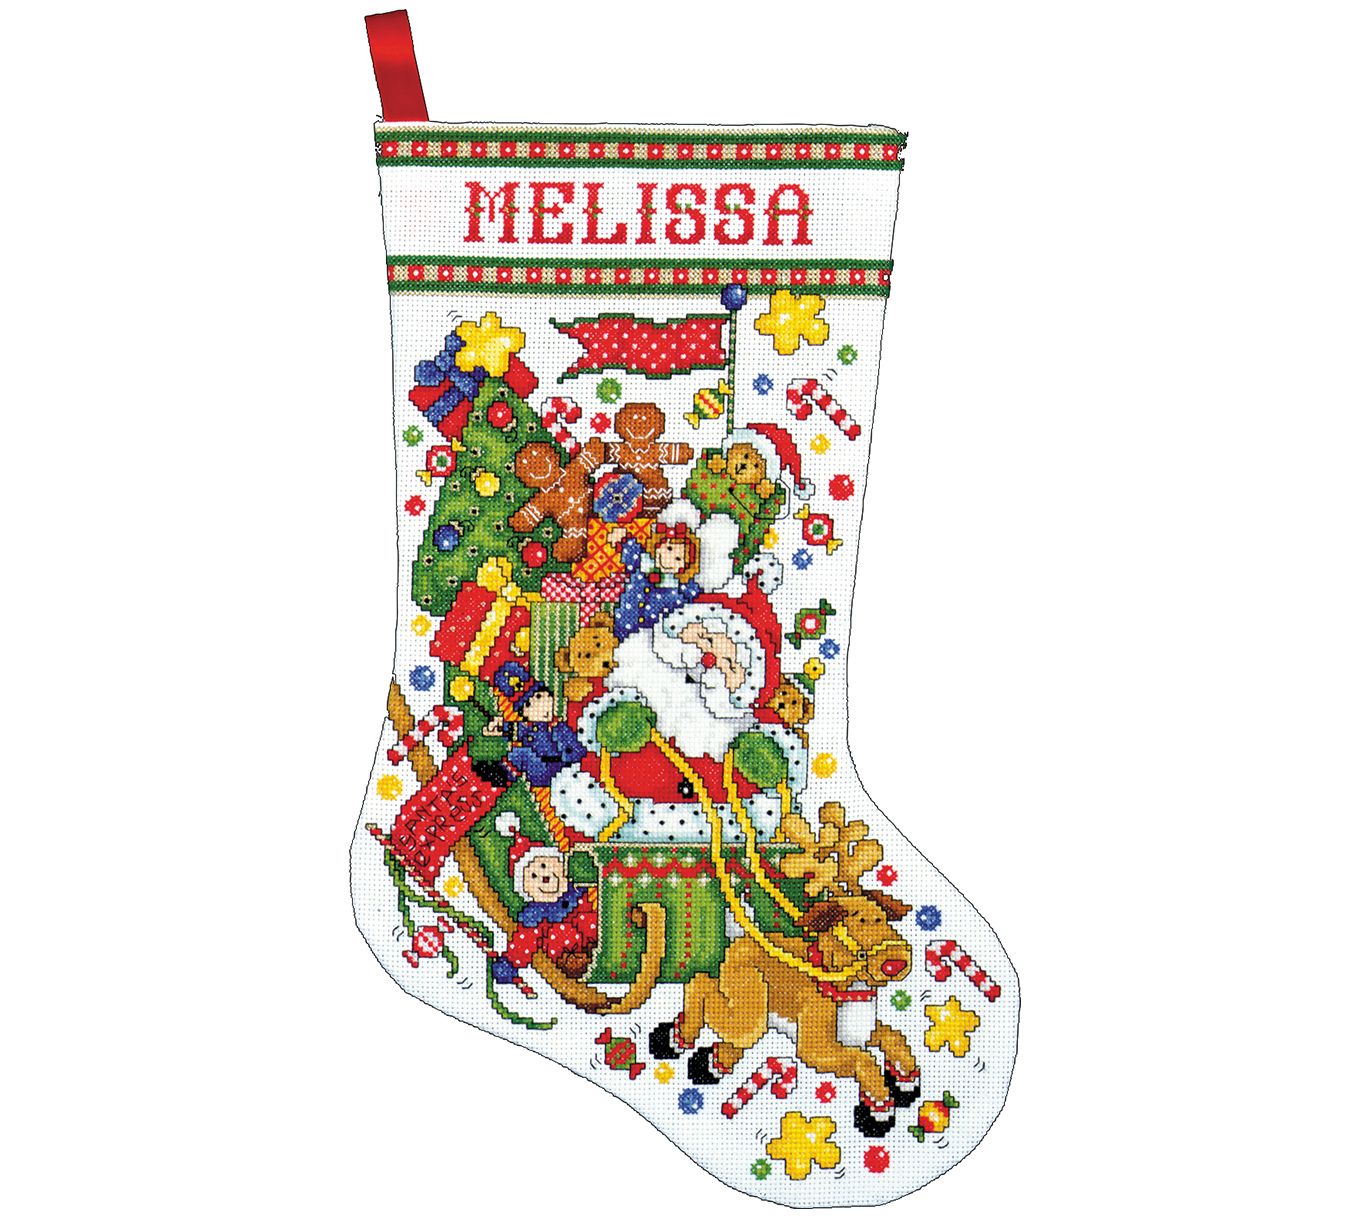 Holiday Glow Stocking Counted Cross Stitch Kit - Needlework Projects, Tools  & Accessories